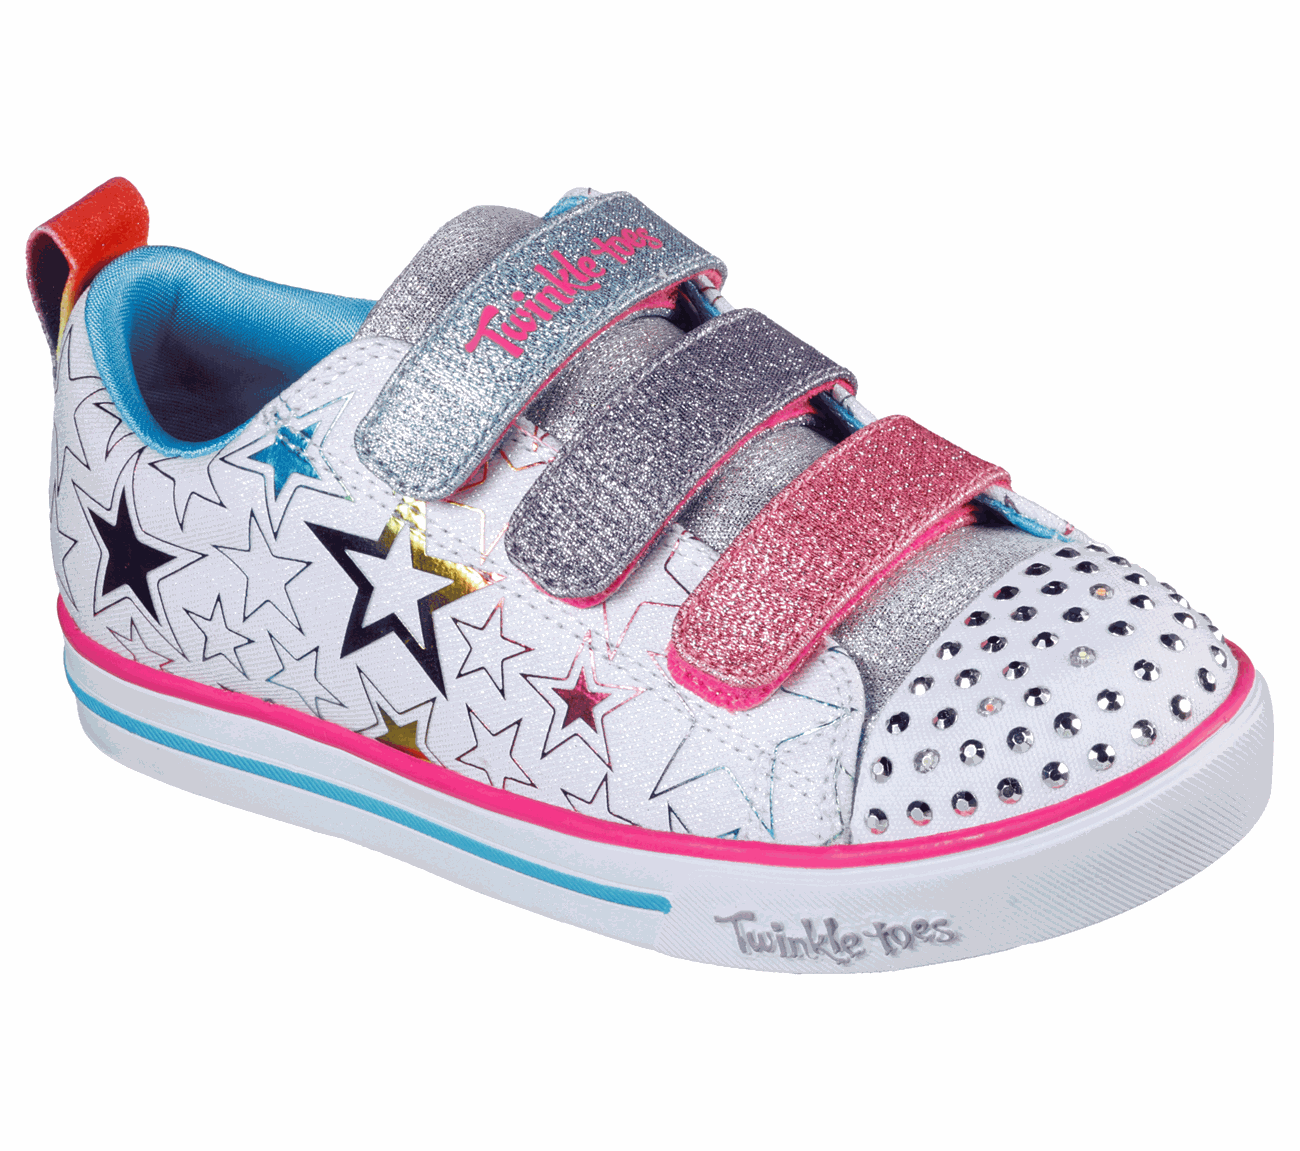 Buy SKECHERS Twinkle Toes: Sparkle Lite - Stars The Limit S-Lights Shoes